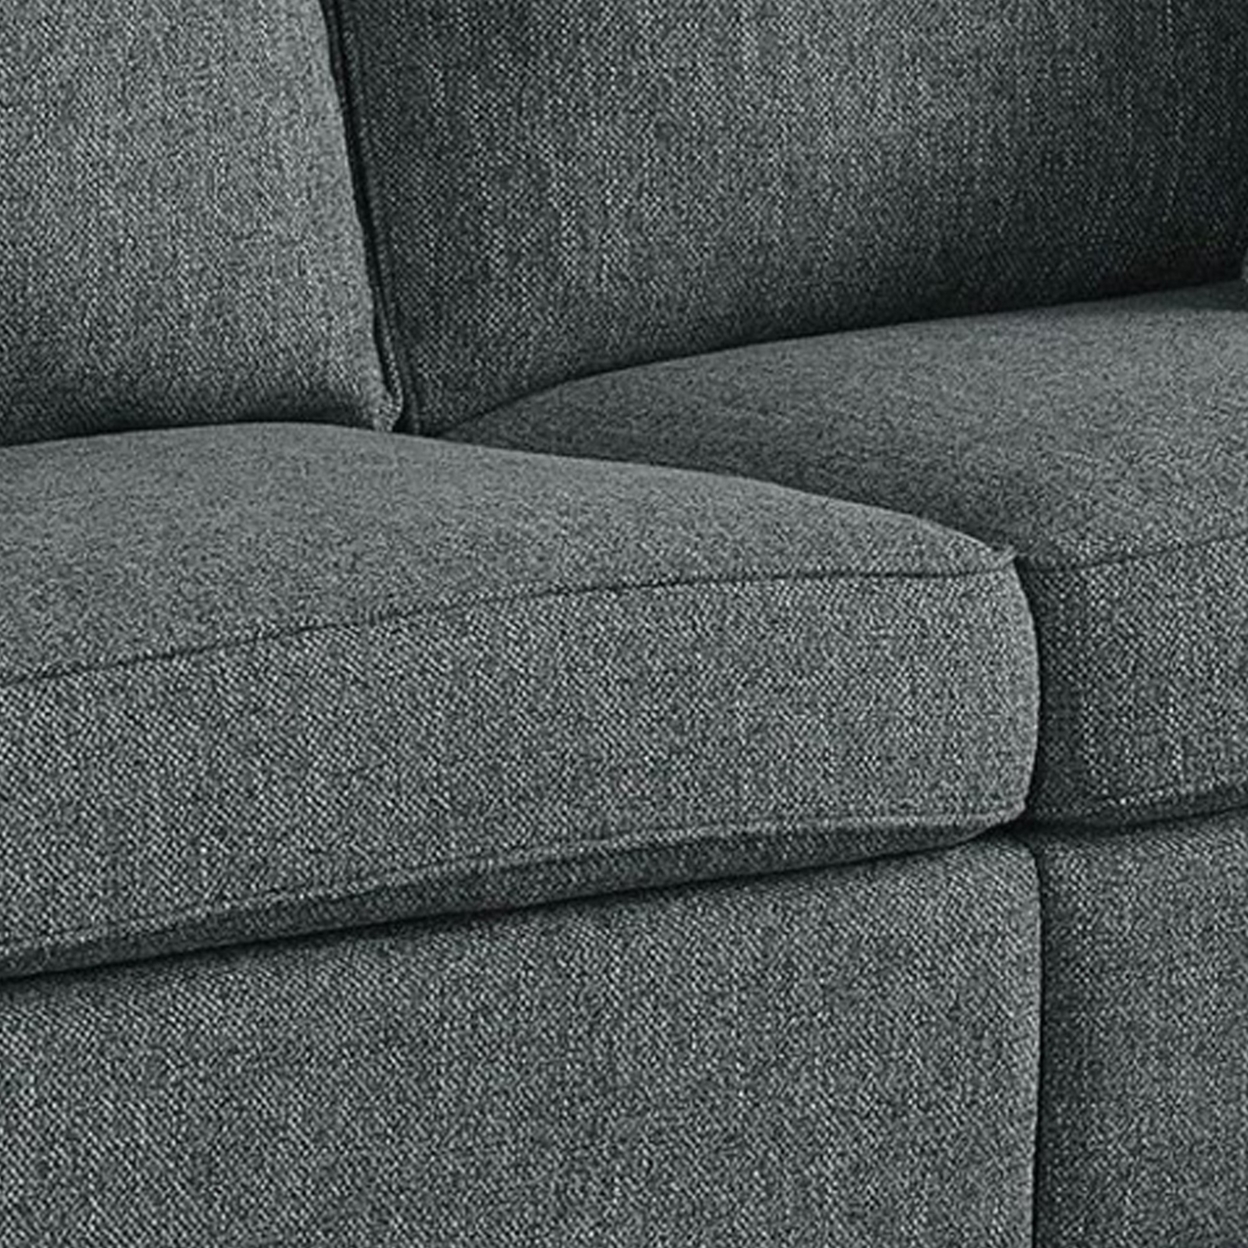 Sofa With Fabric Upholstery And Rolled Design Arms, Gray- Saltoro Sherpi